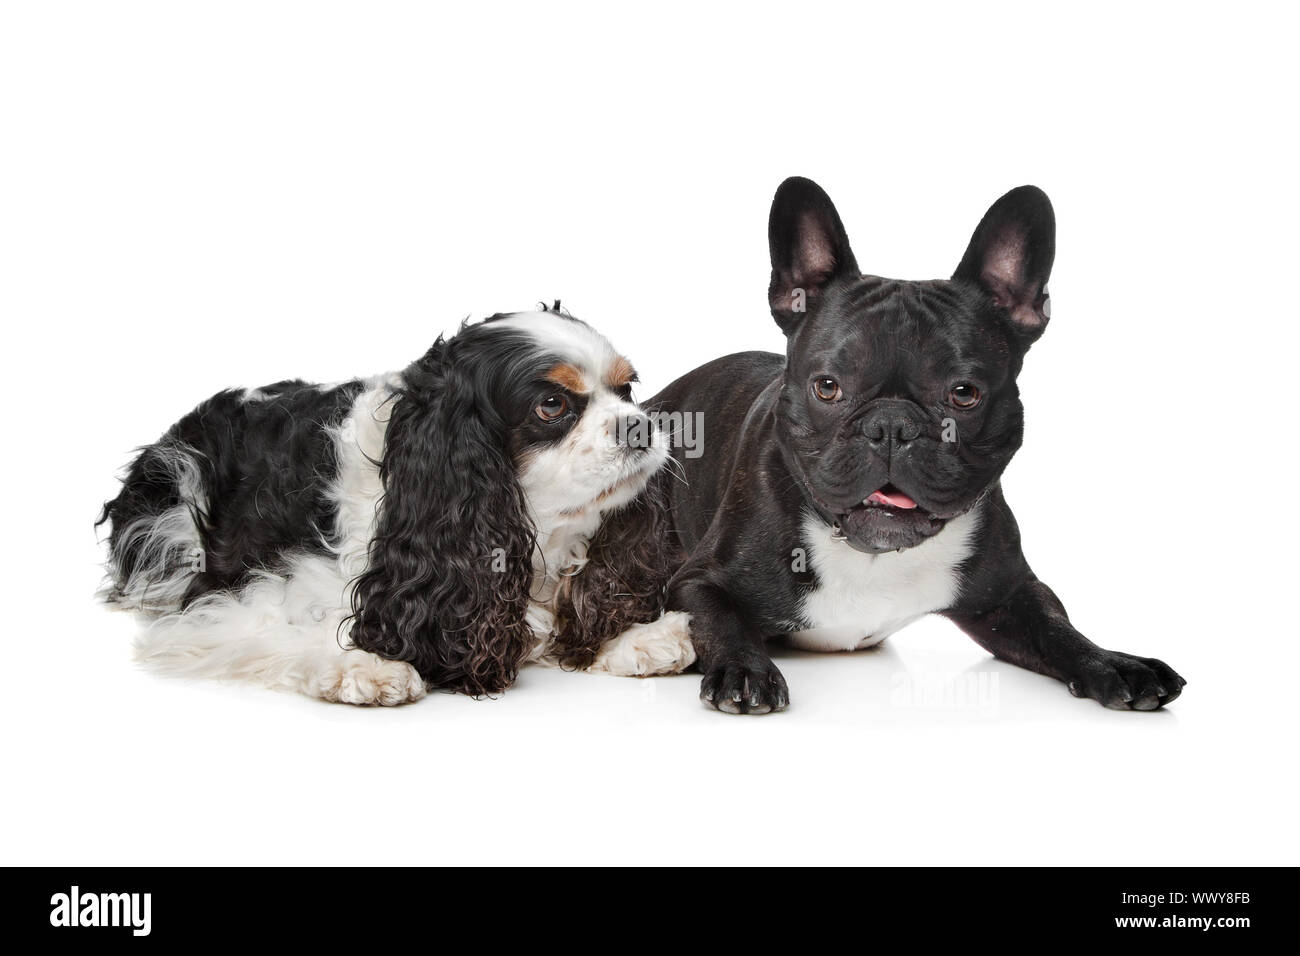 French bulldog king charles hi-res stock and images - Alamy